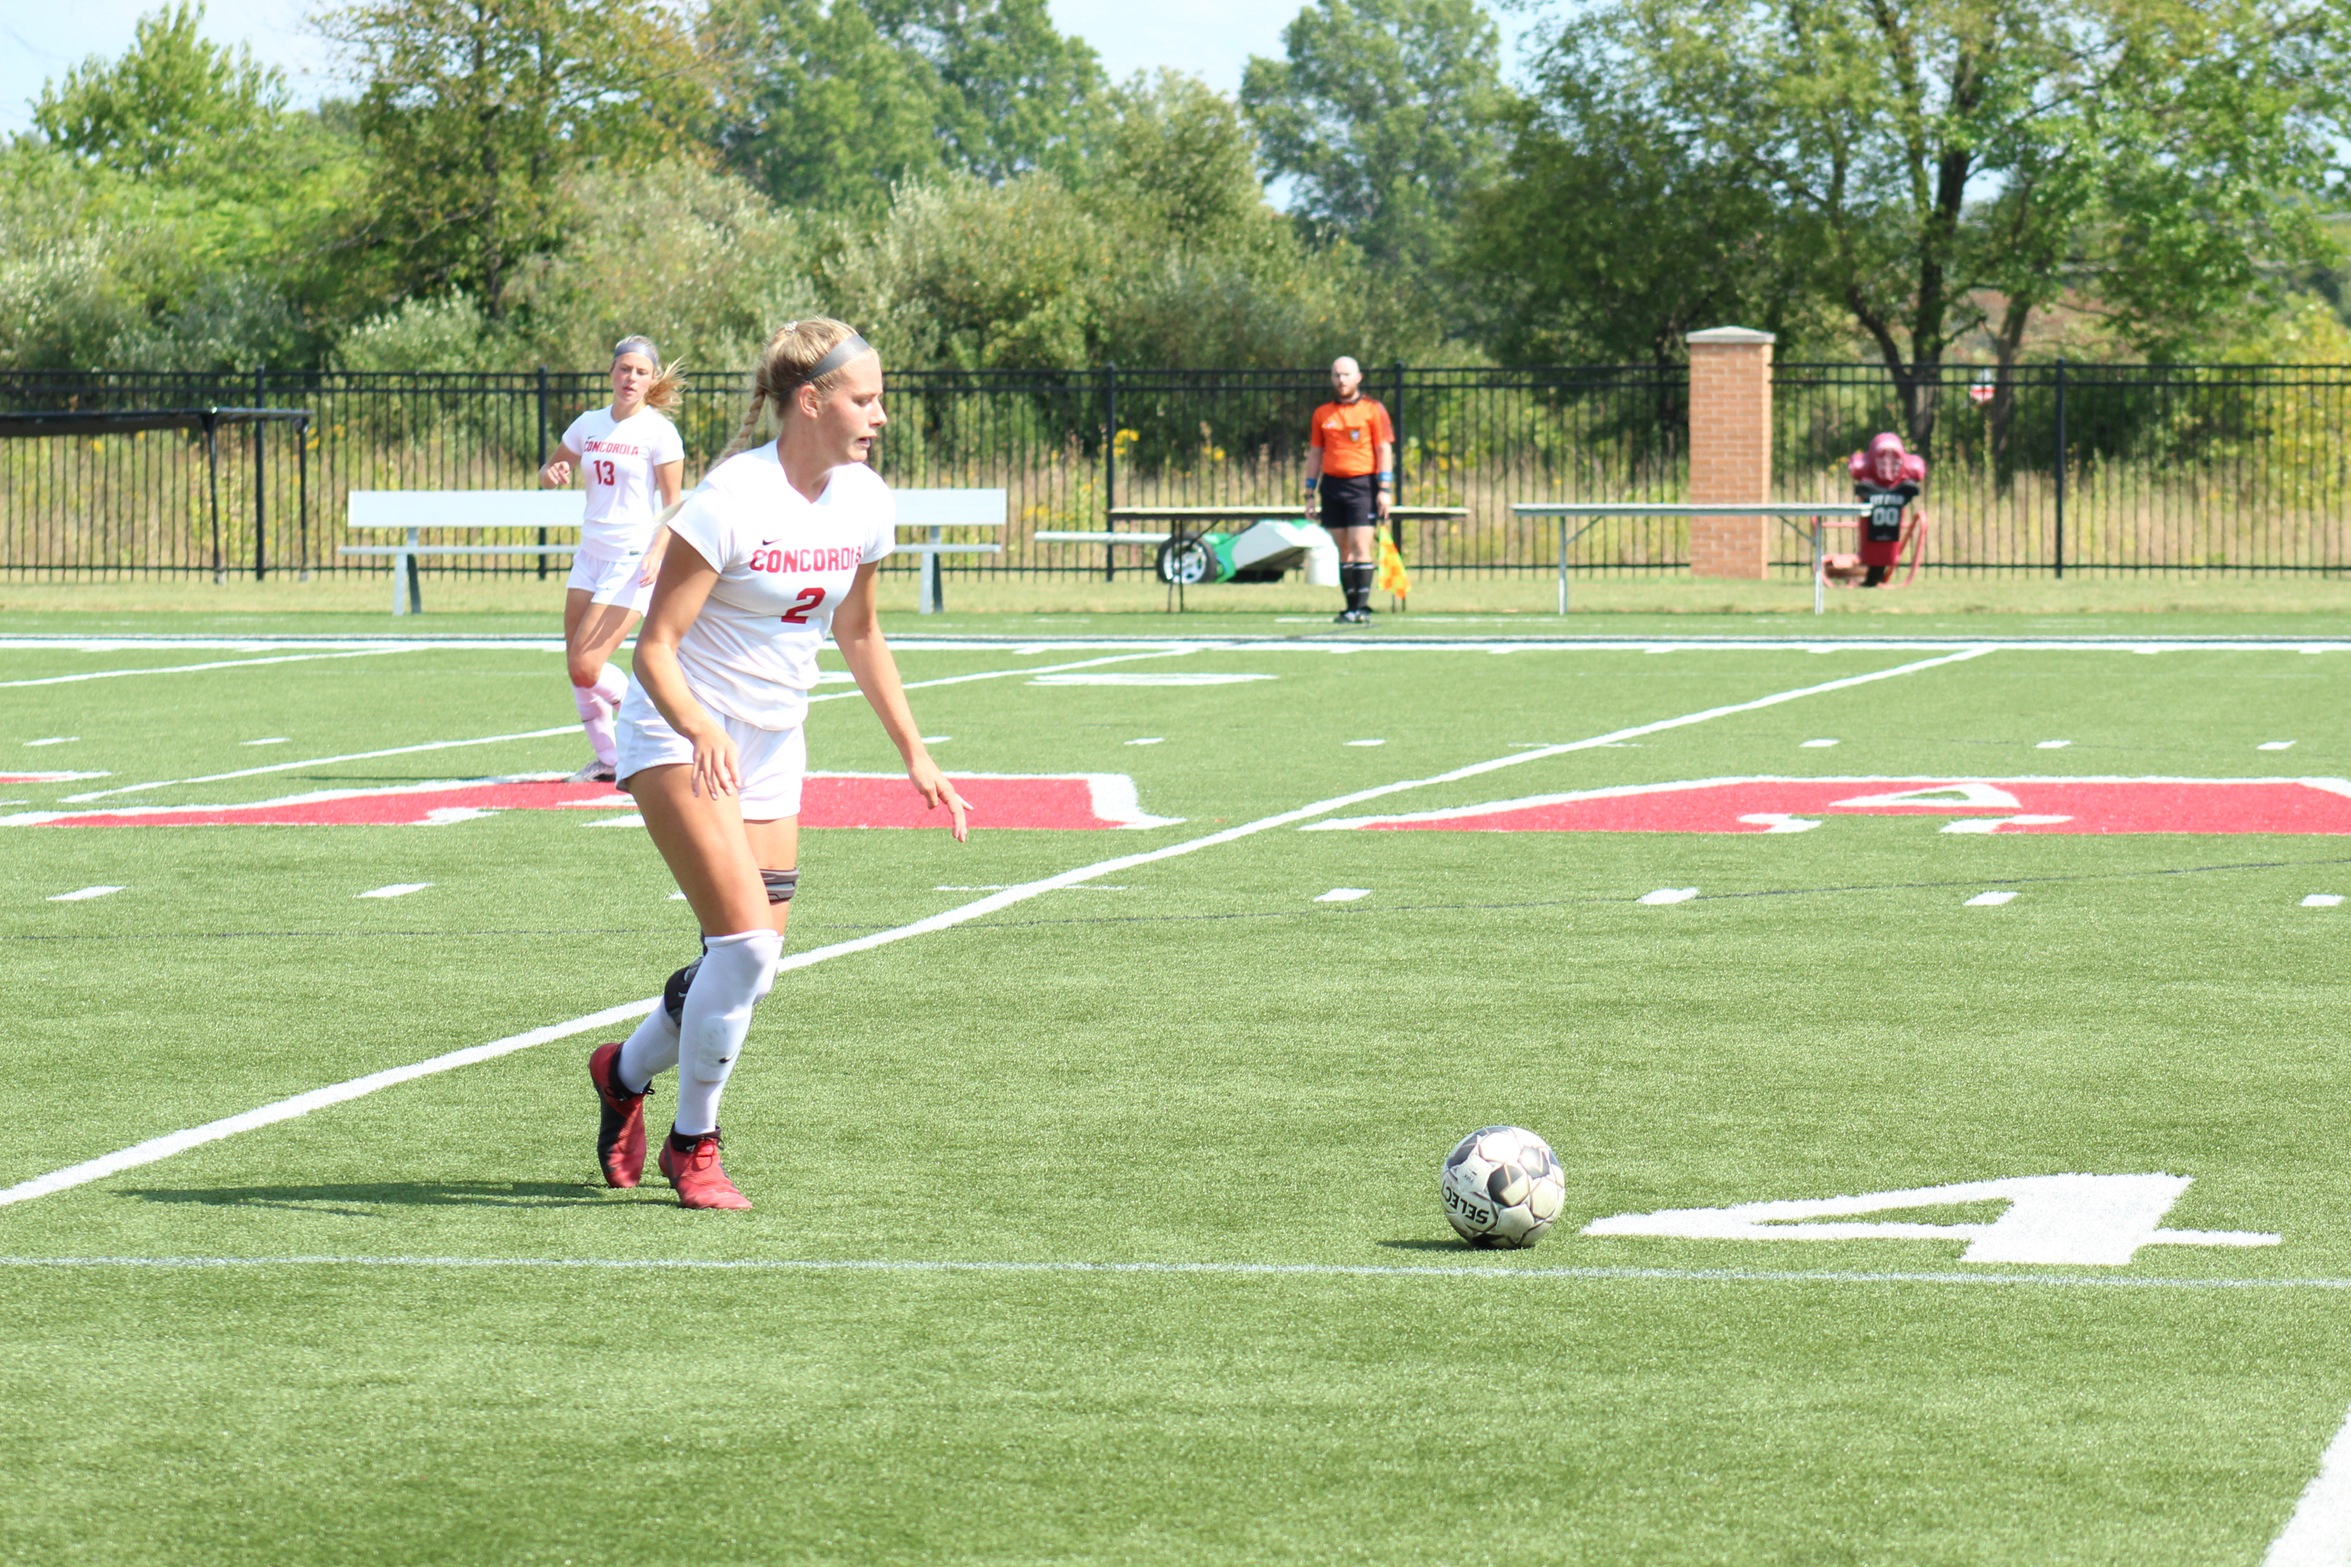 Cardinals fall to Crusaders in WHAC battle